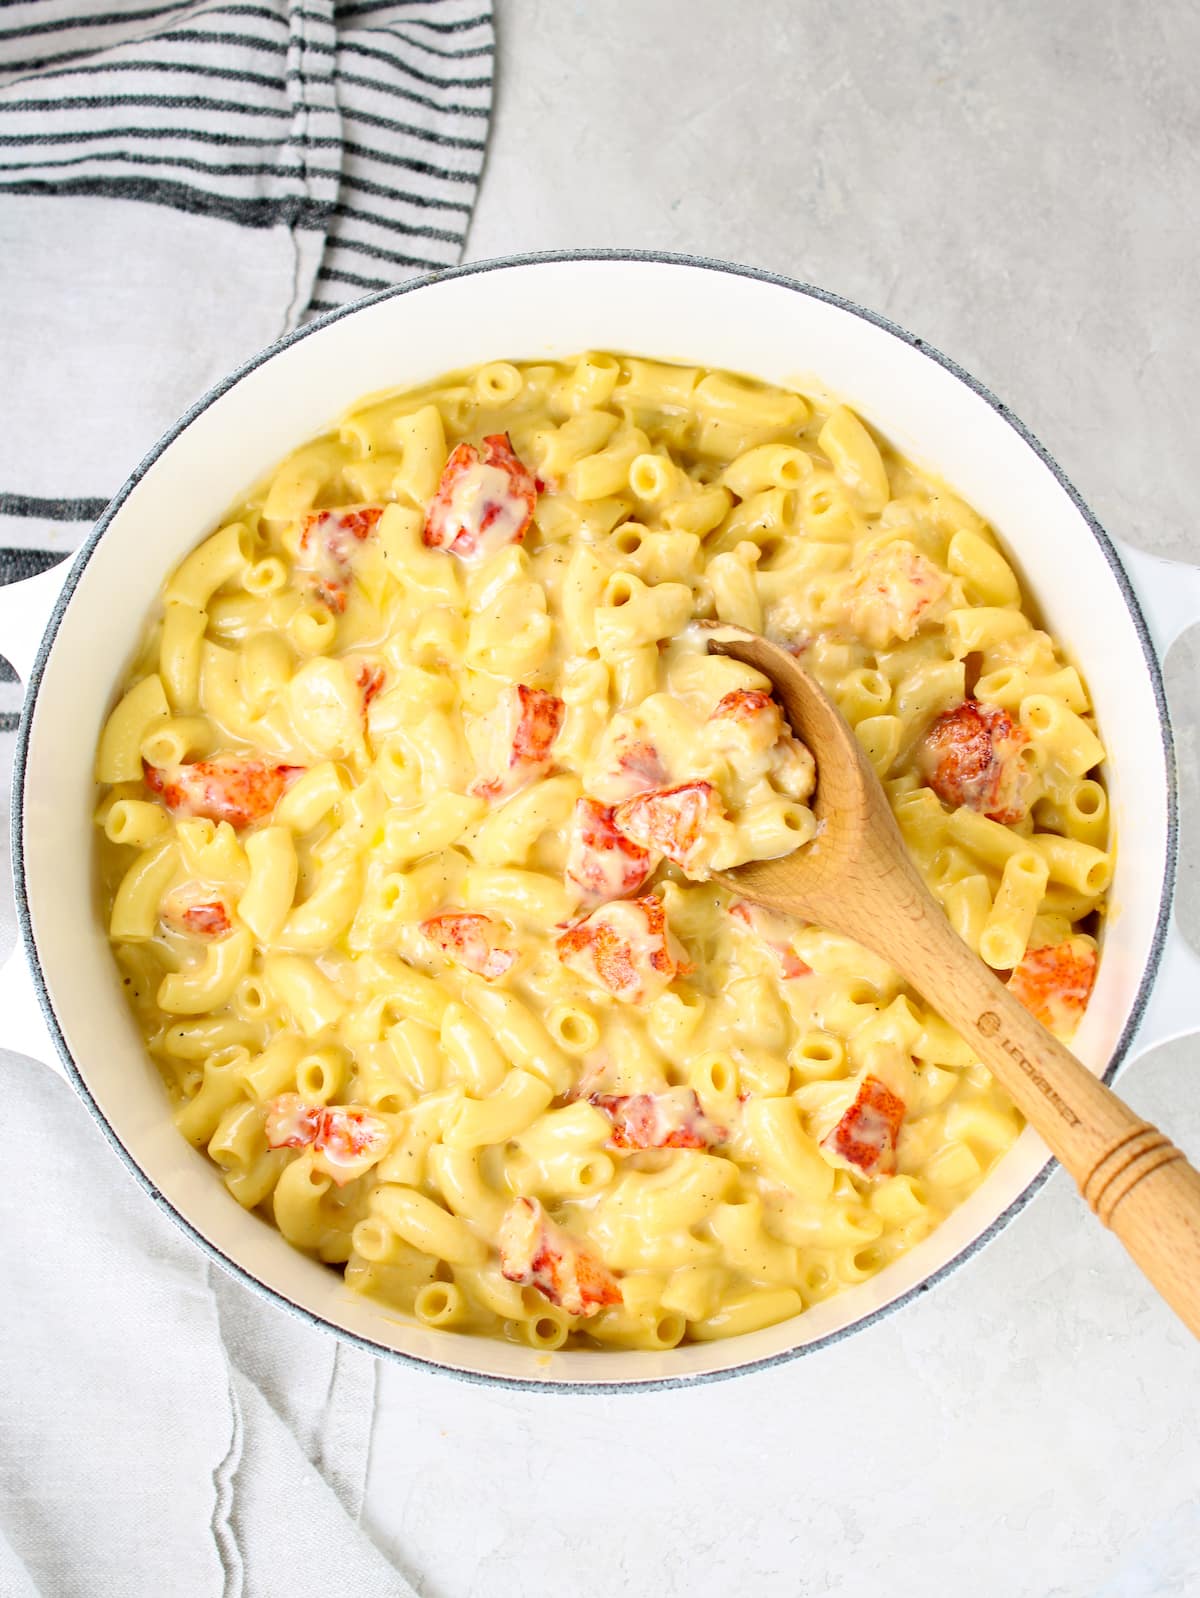 A large pot with melted cheese, macaroni, and lobster.